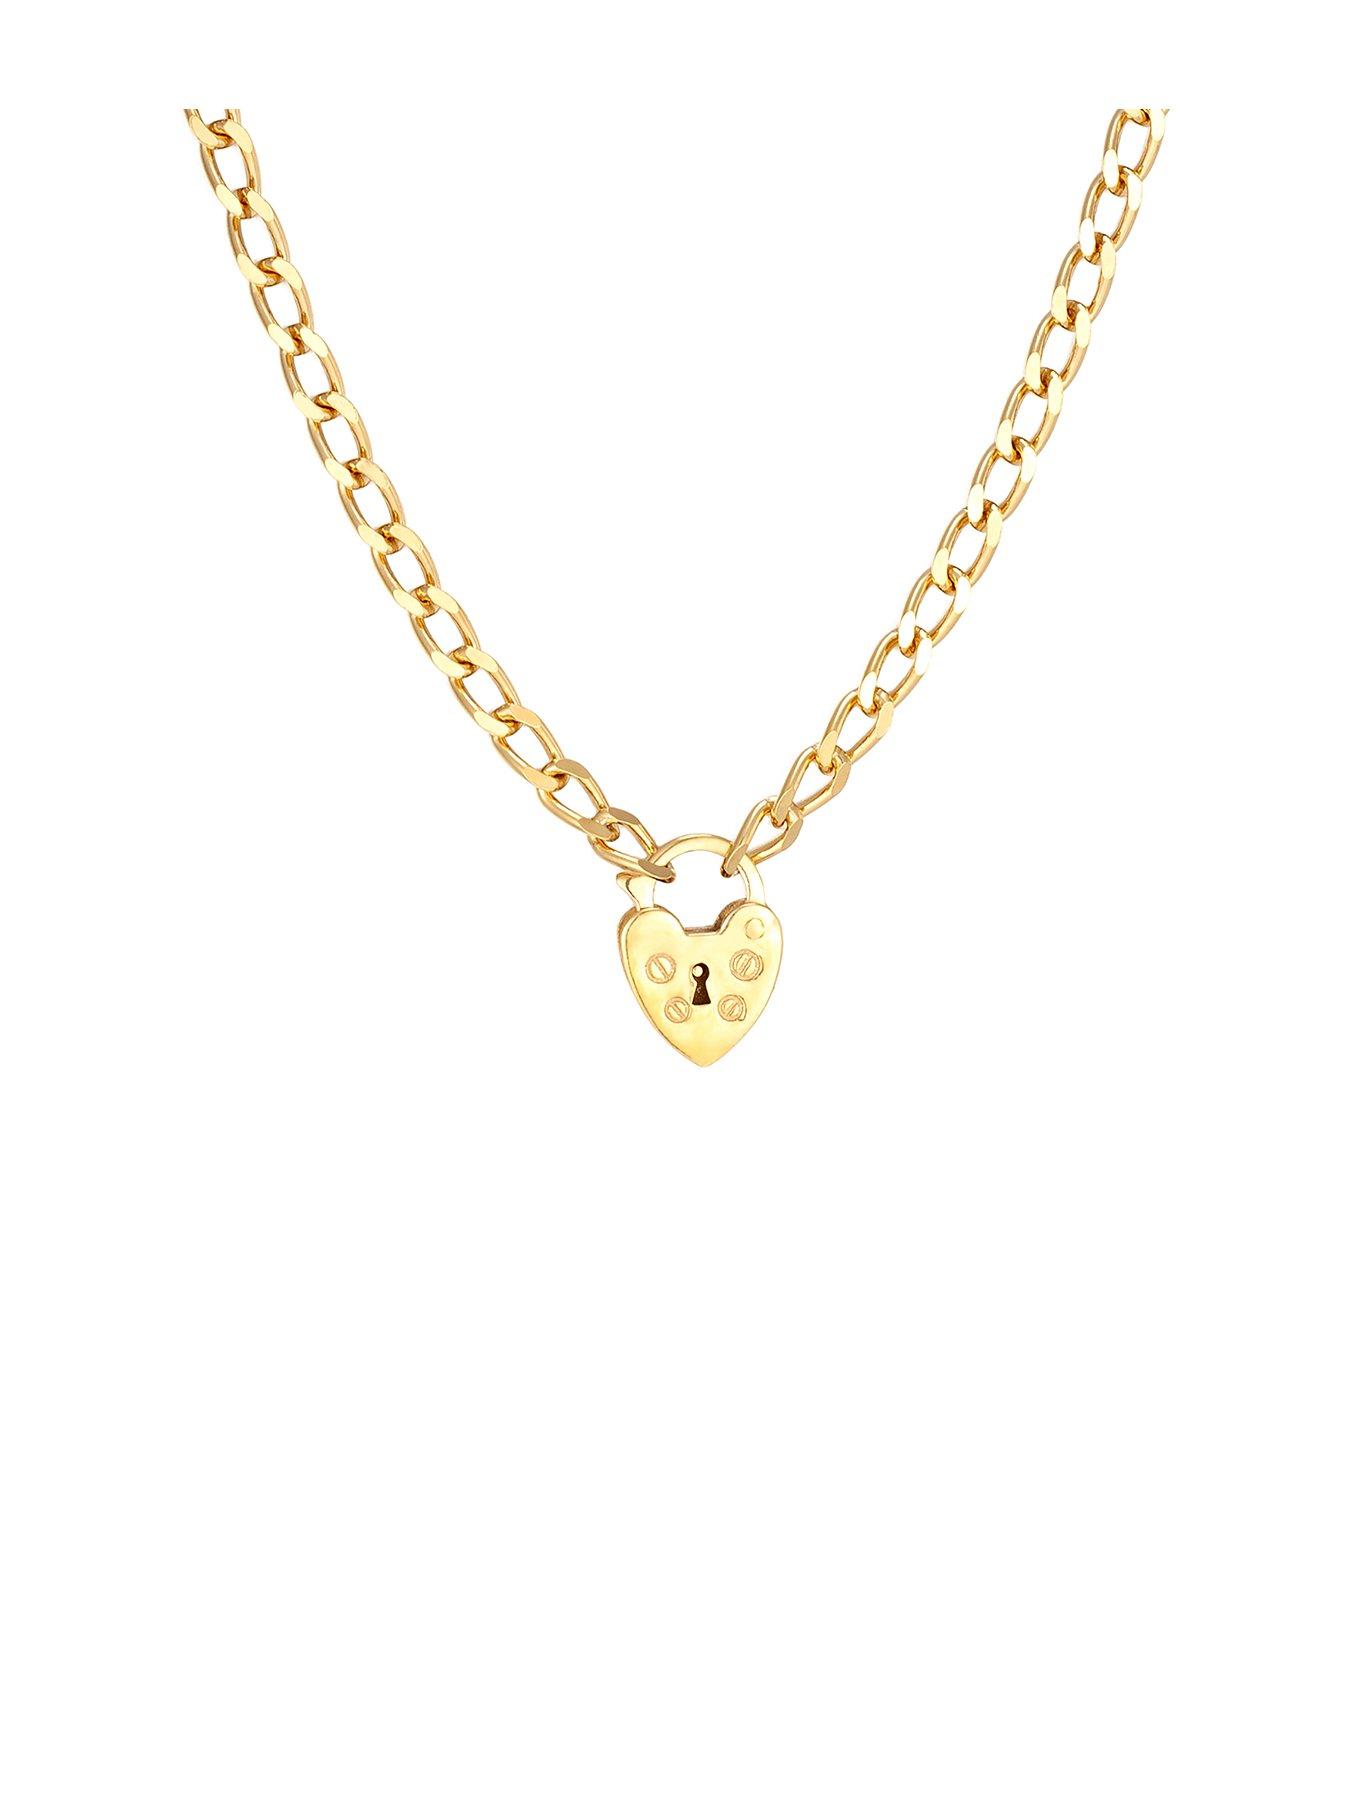 Seol + Gold sterling silver 20-22 length curb chain necklace